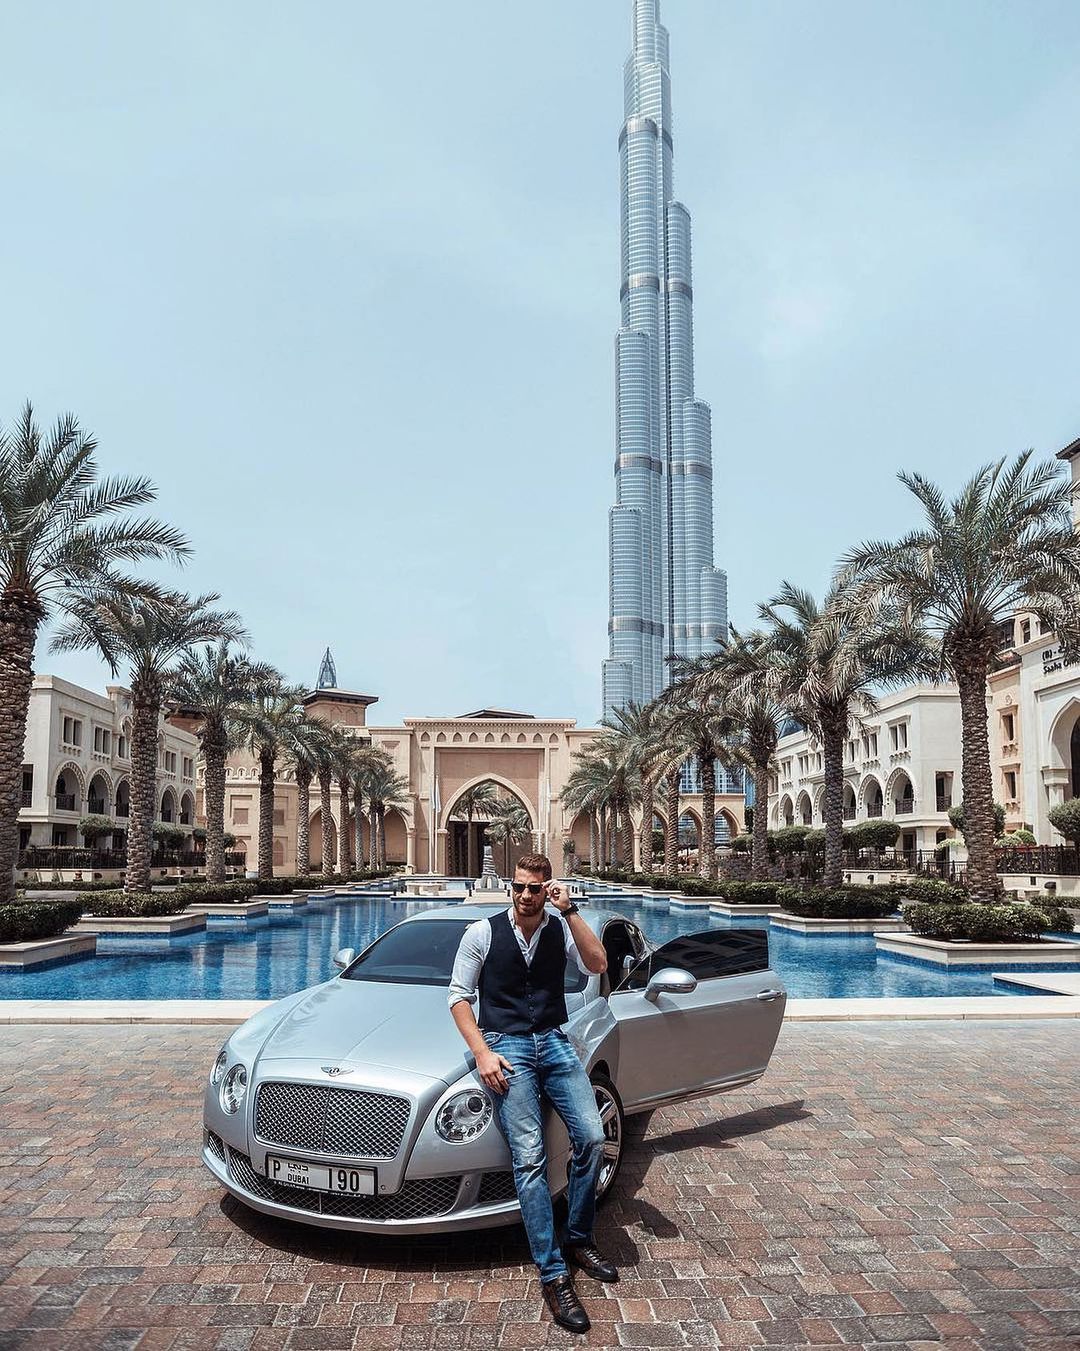 A man posing with a luxury car in front of the Burj Khalifa during a photoshoot in Dubai.